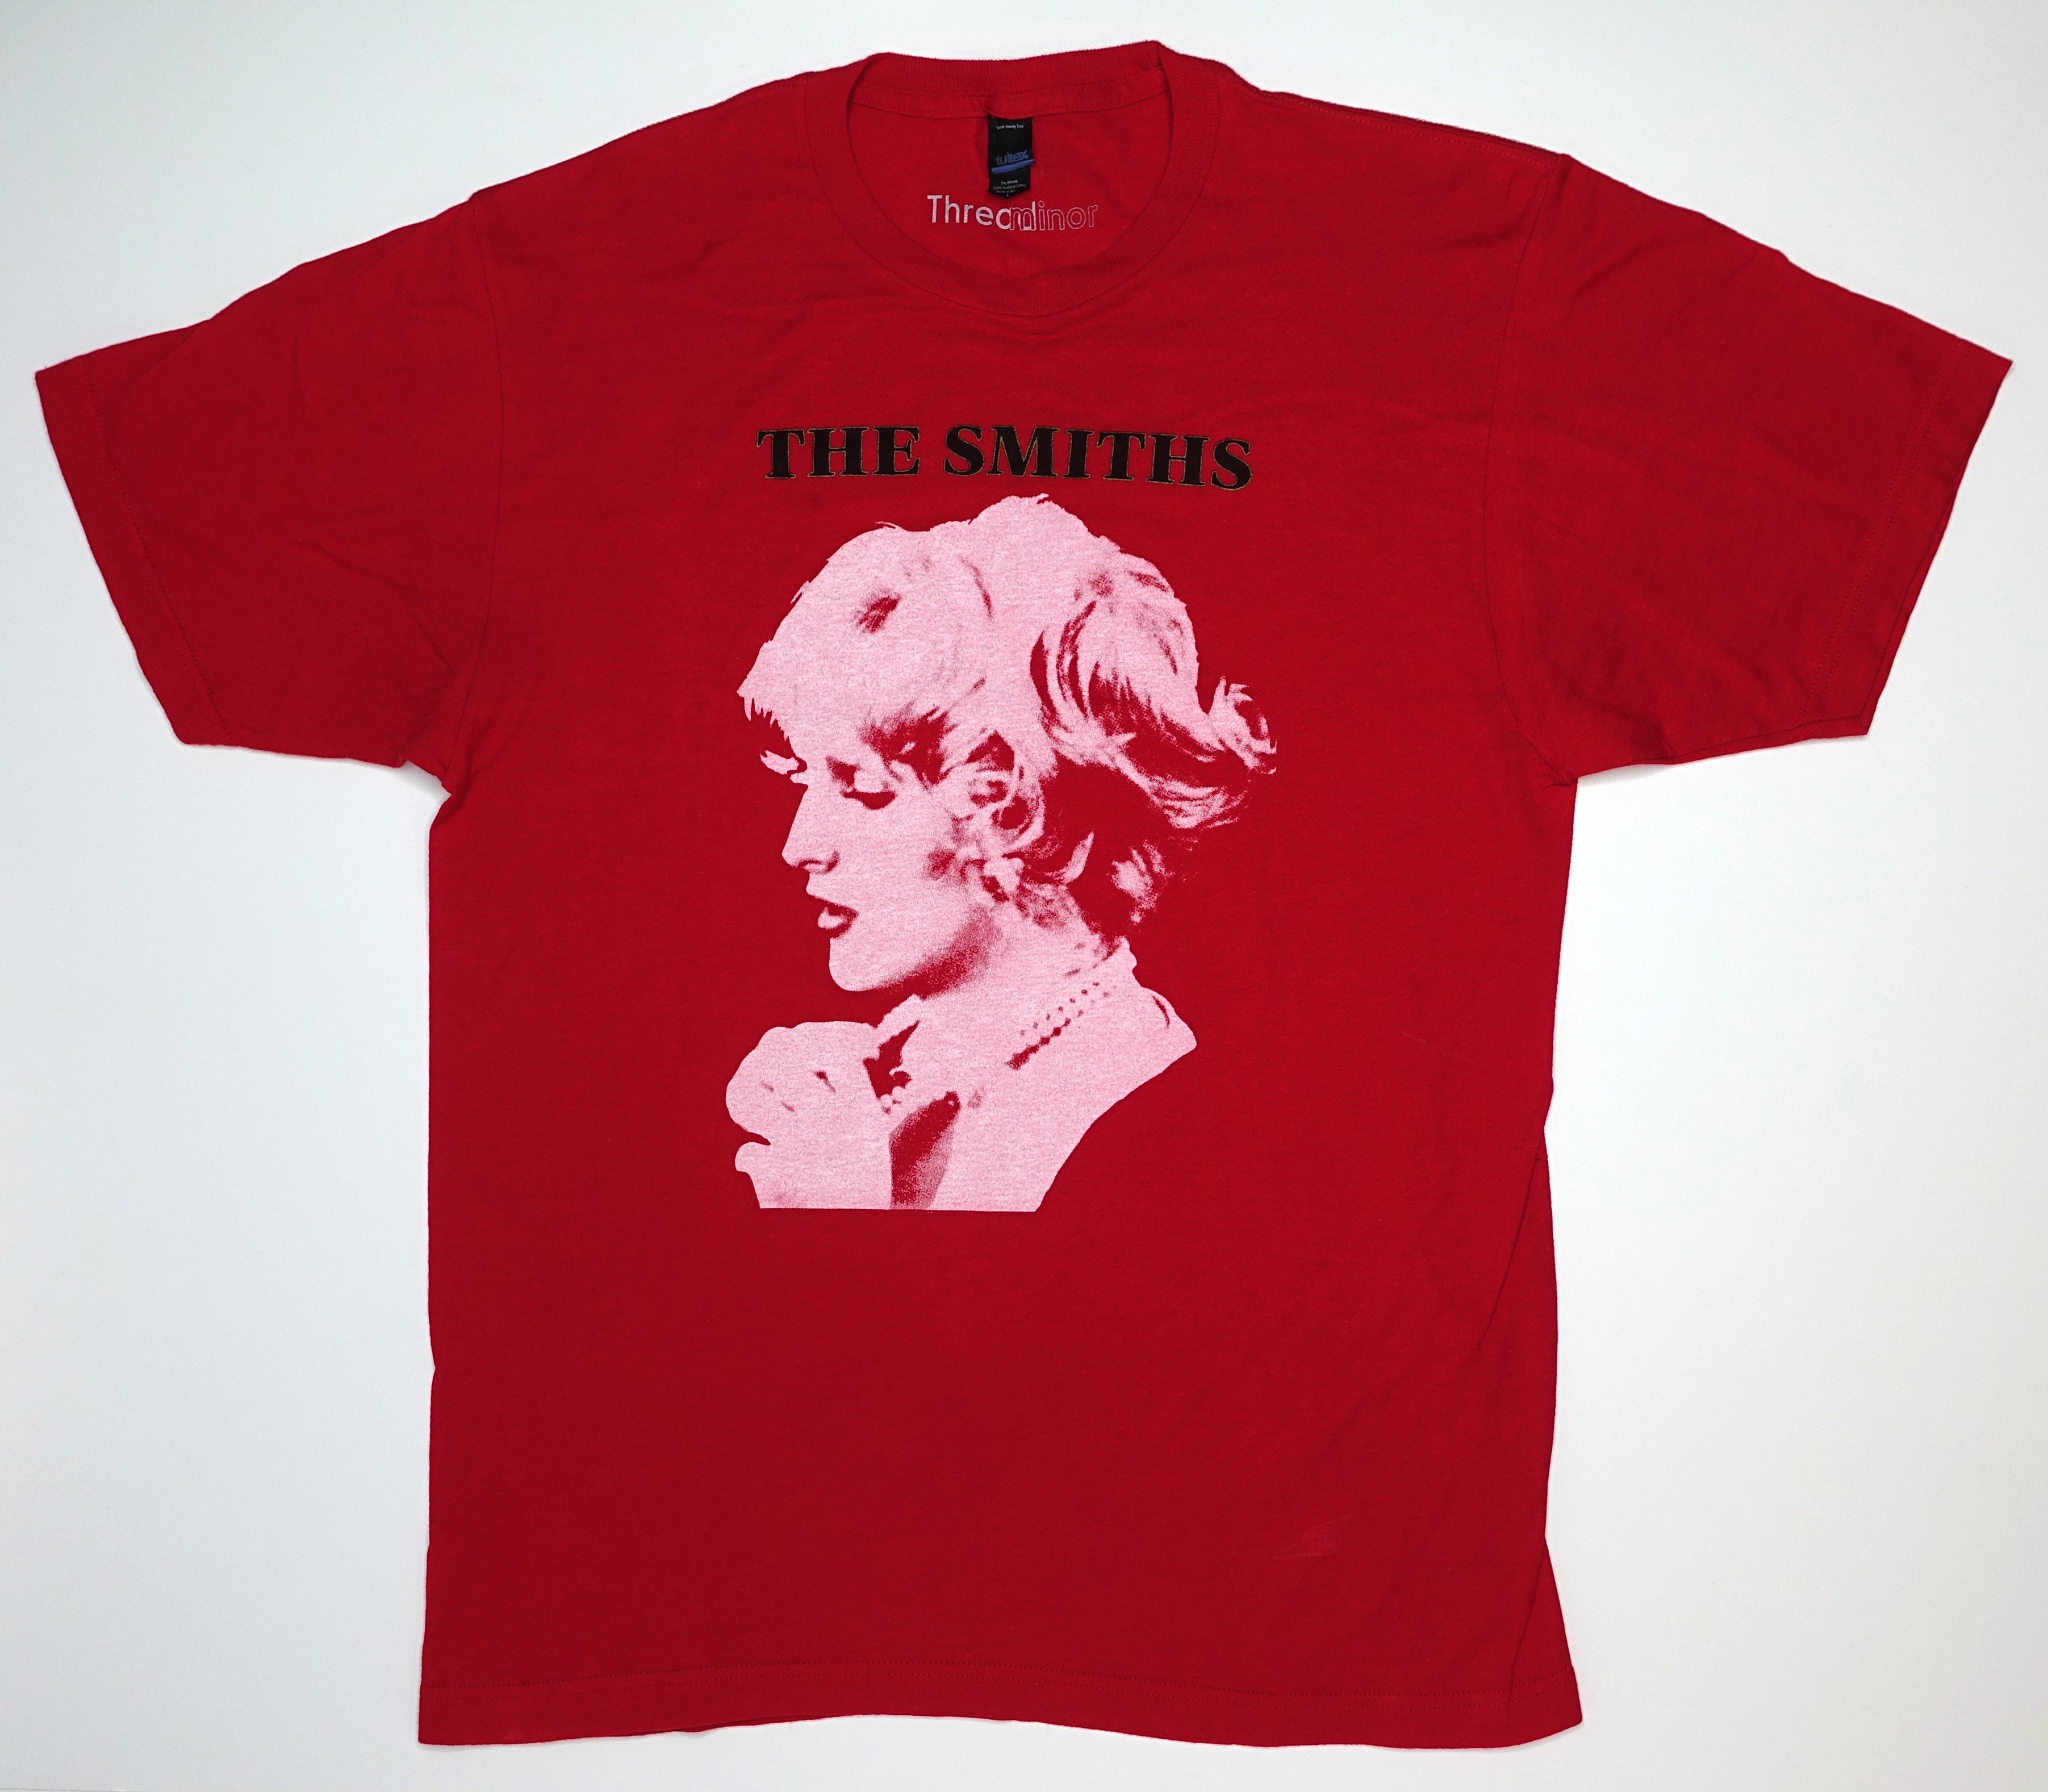 the Smiths - Shelia Take a Bow Red Shirt (Bootleg by Me) Size Large